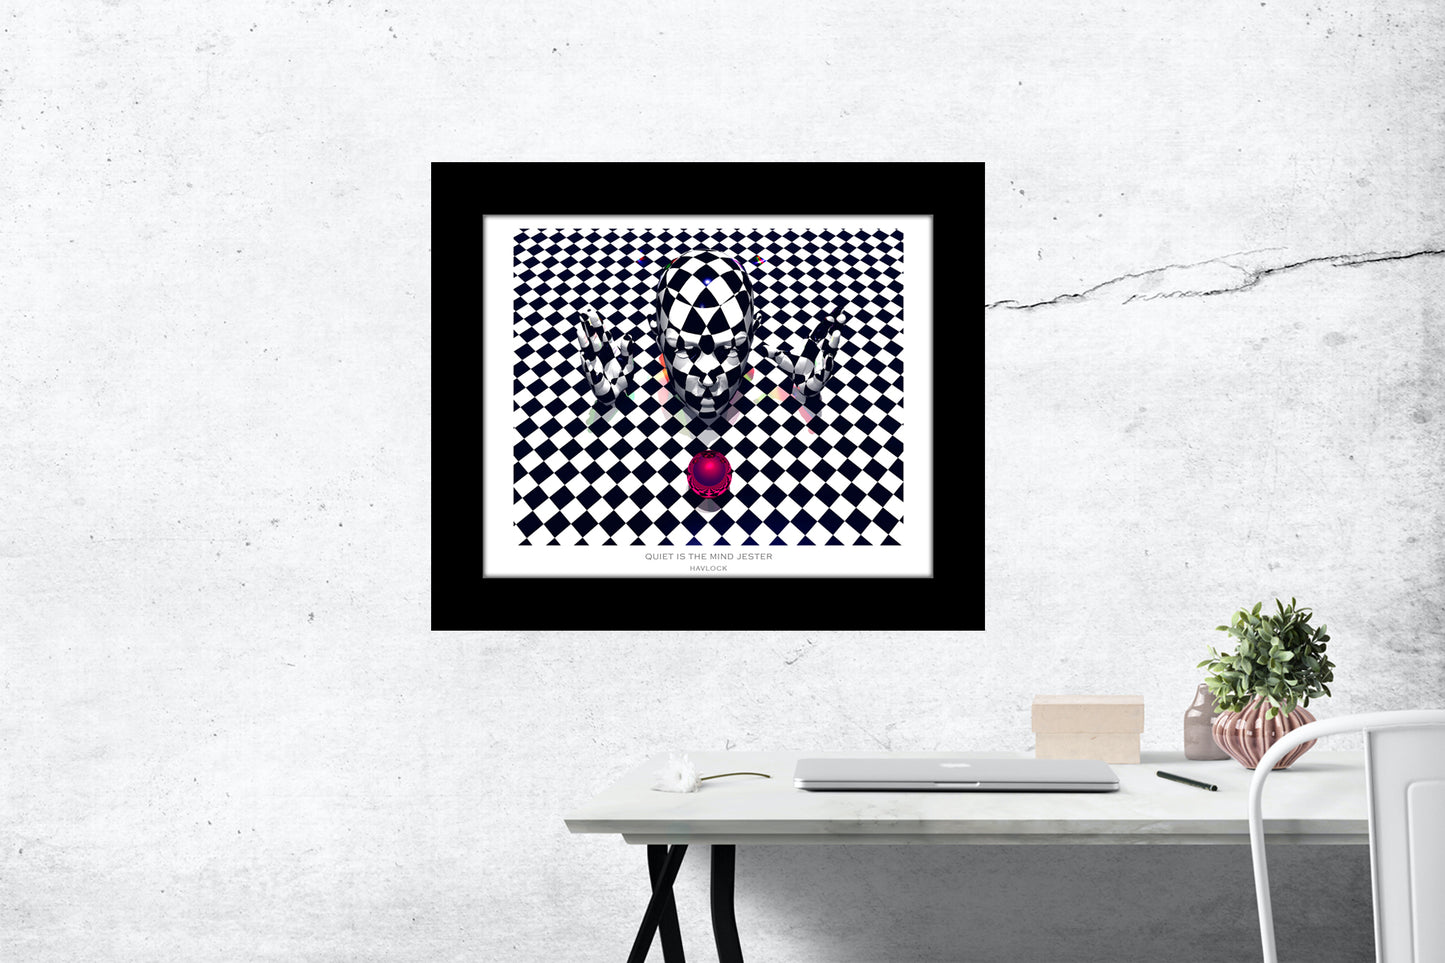 Quiet Is The Mind Jester ~ Master Minds - 8x10 Print in Collector's Sleeve